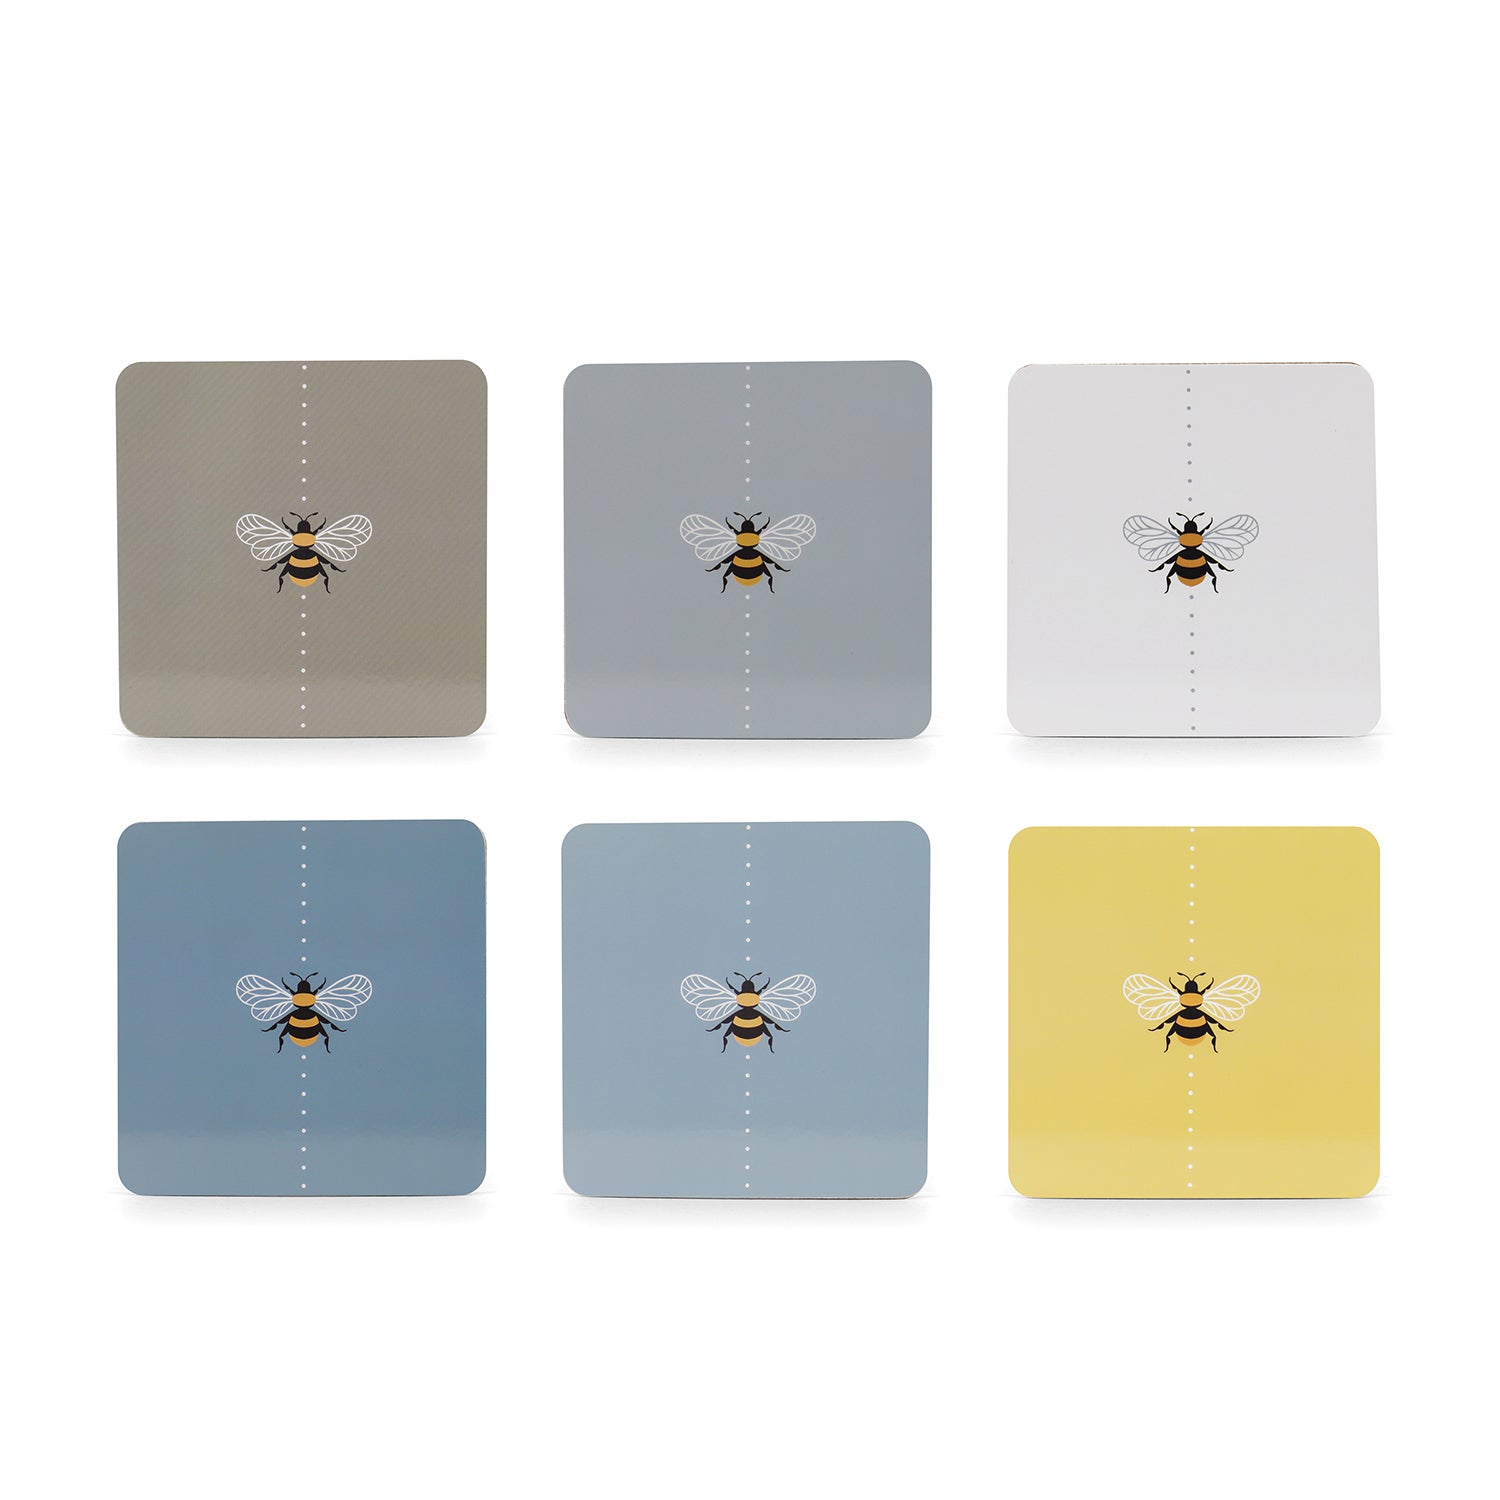 Tipperary Crystal Bumble Bee 6 Piece Coasters Set 1 Shaws Department Stores